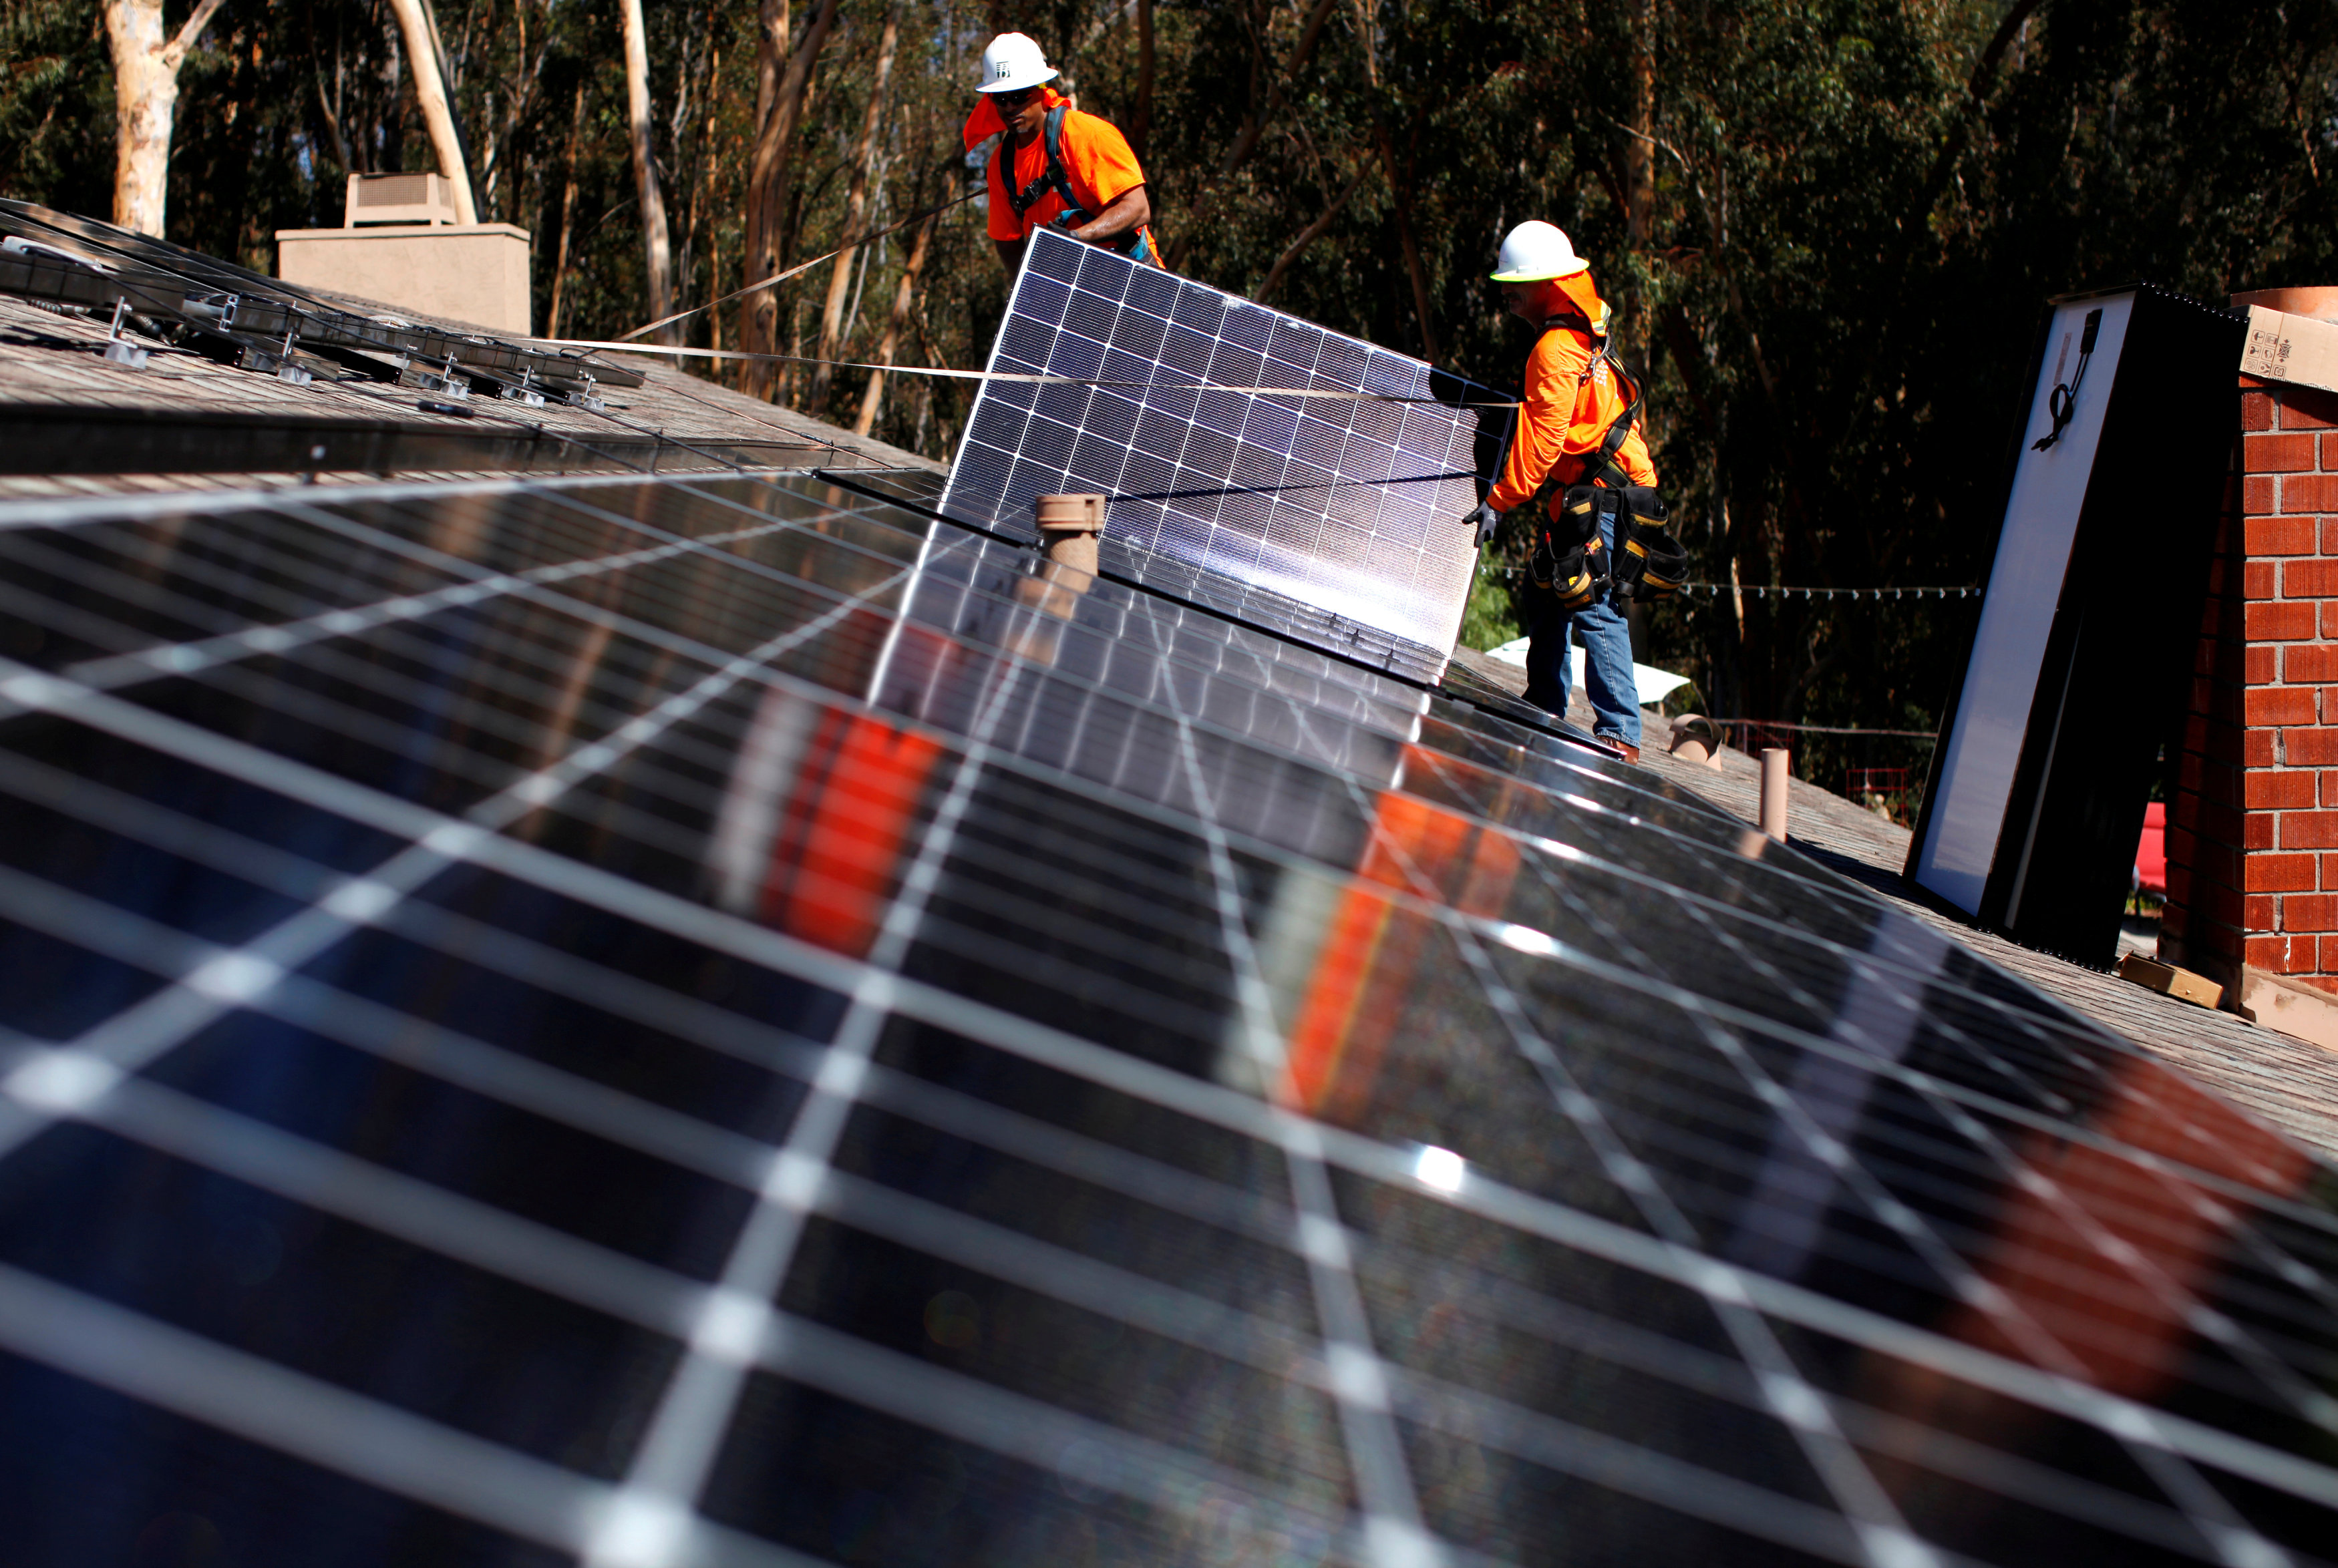 US agency doubles financial support for solar projects abroad